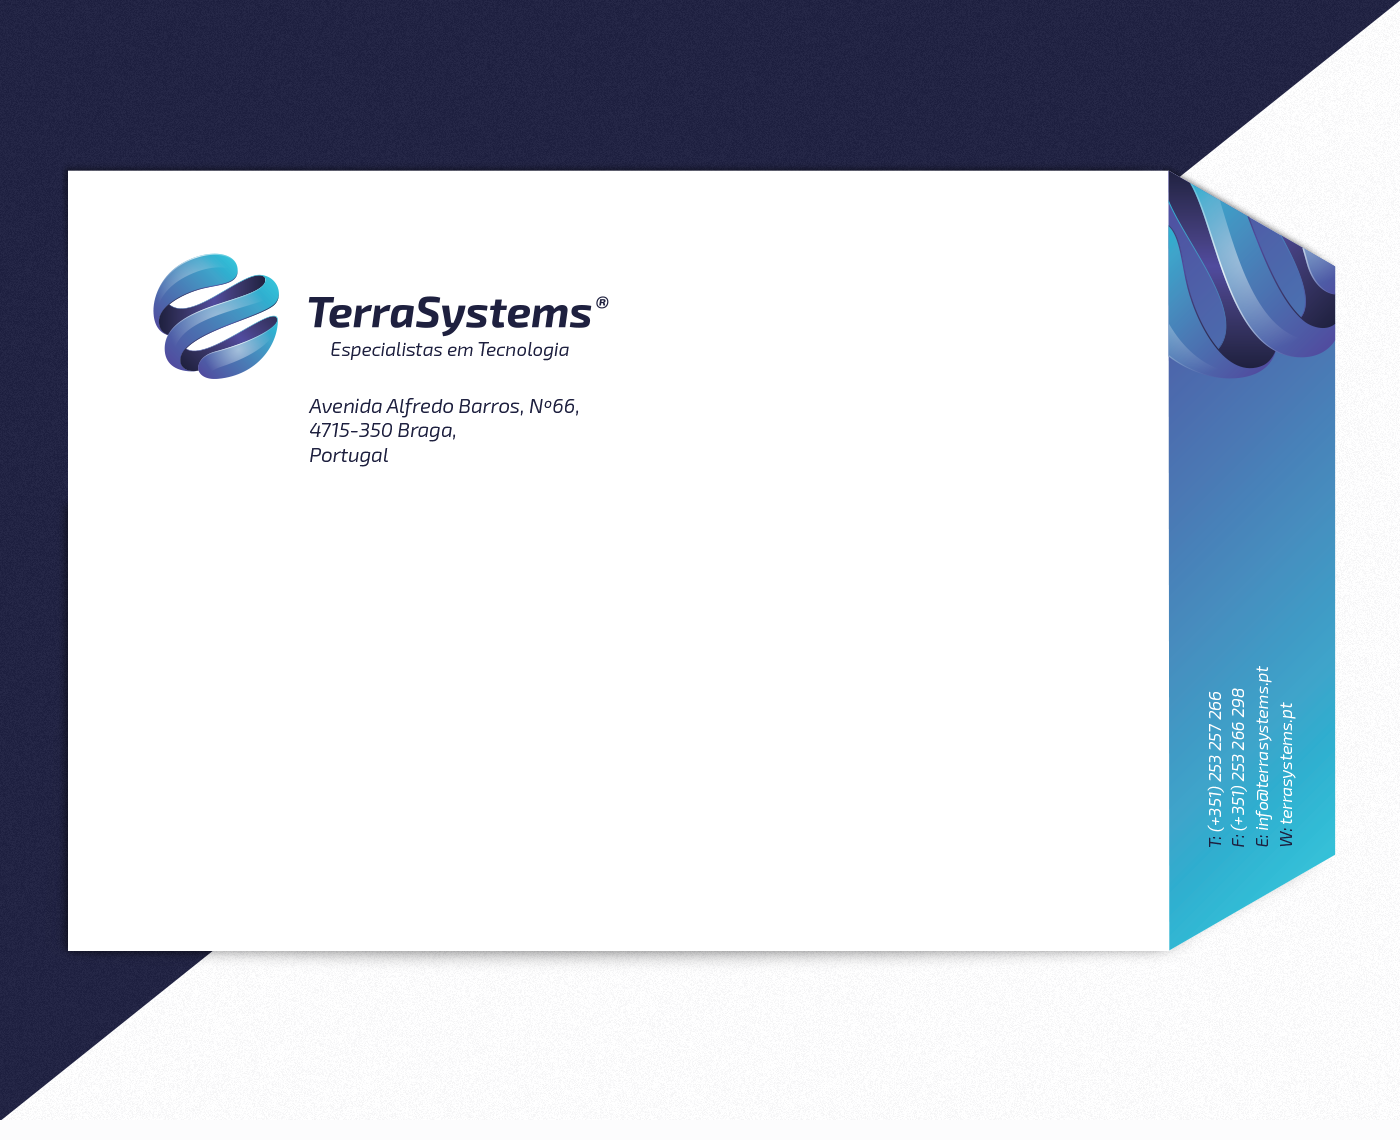 rebranding Technology logo earth Computer Store water Information Technology systems planet earth 3D visual identity brand technical support maintenance splash